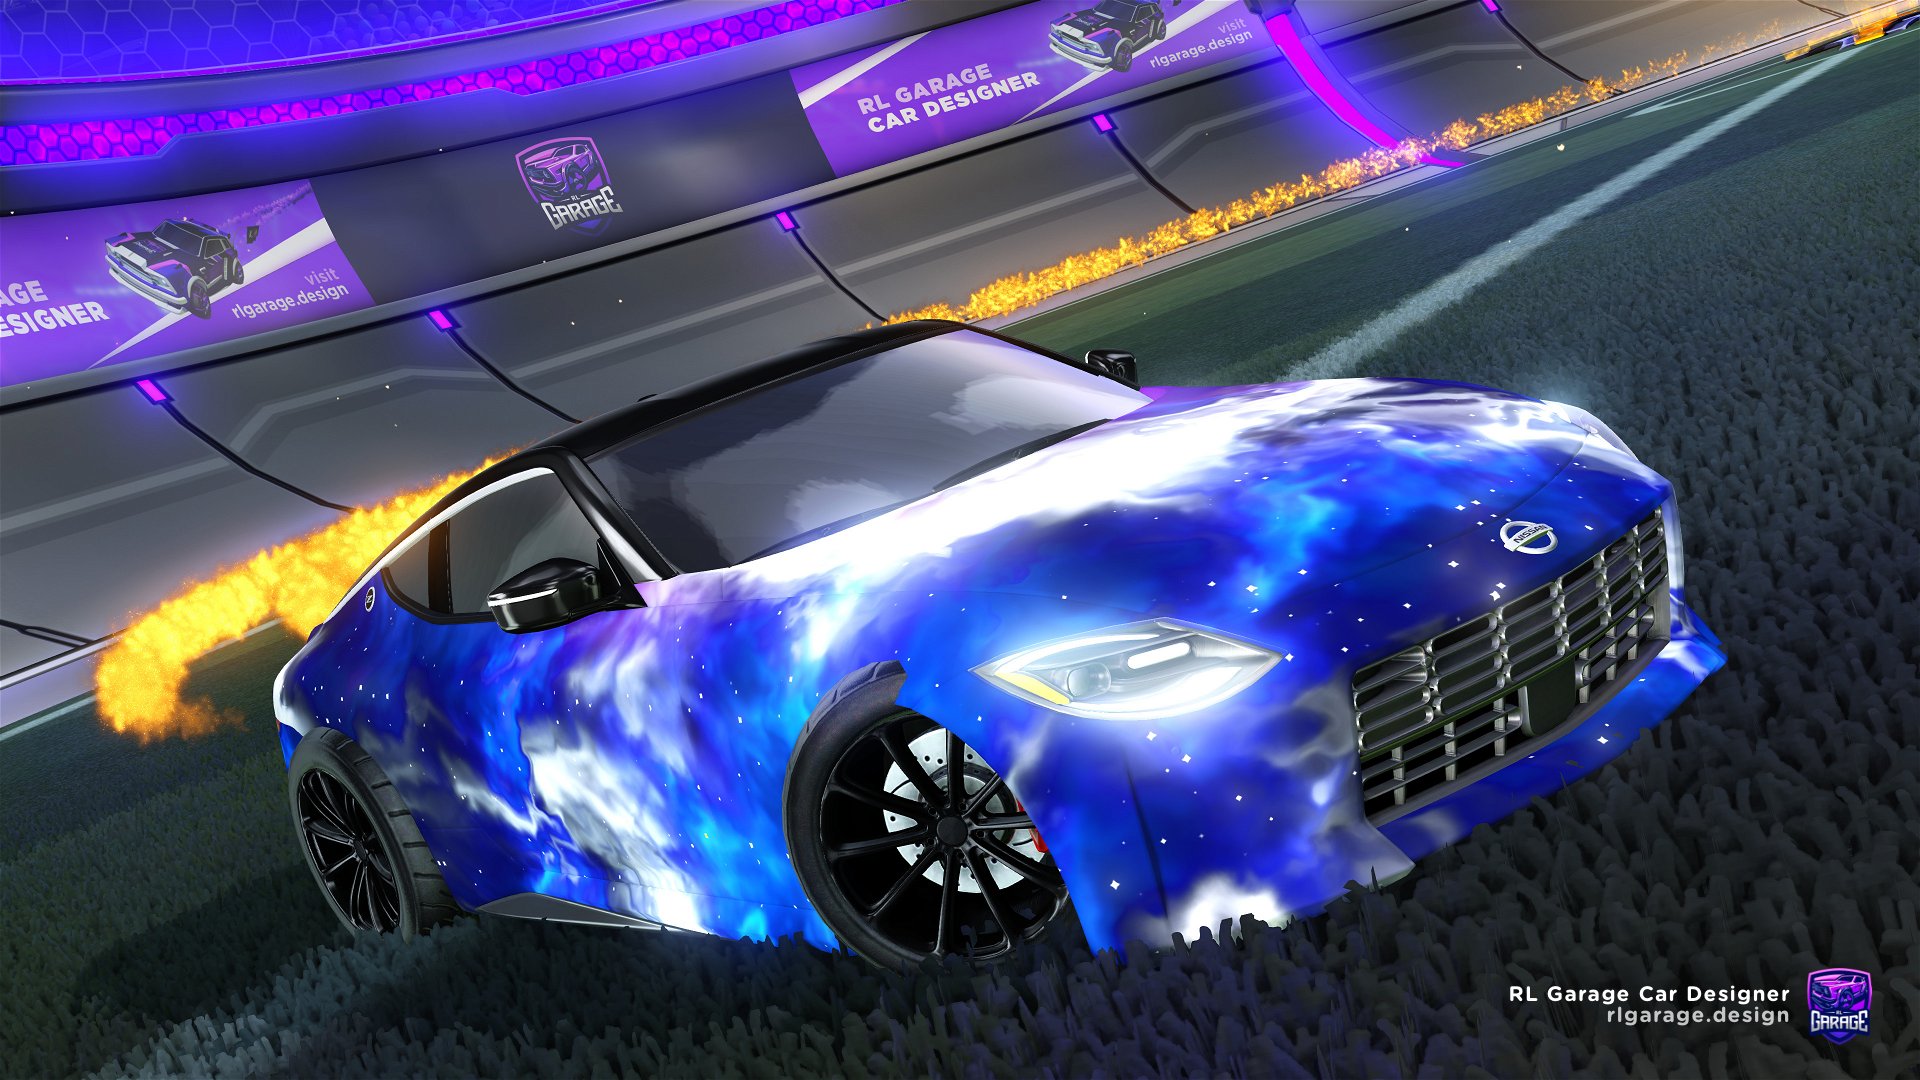 A Rocket League car design by Jplhproplay